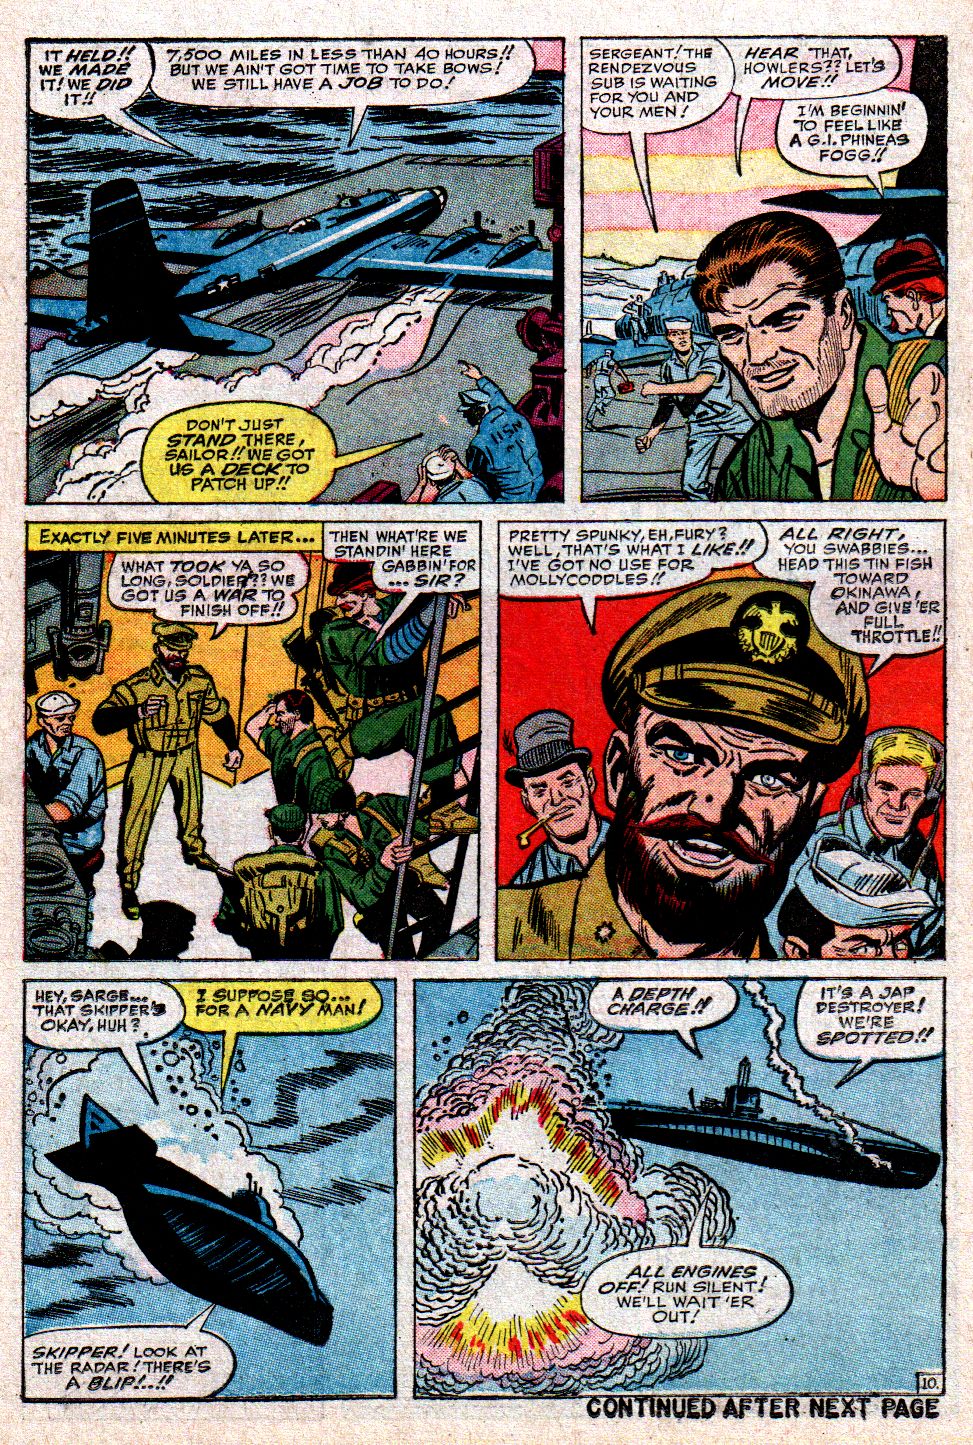 Read online Sgt. Fury comic -  Issue #10 - 14